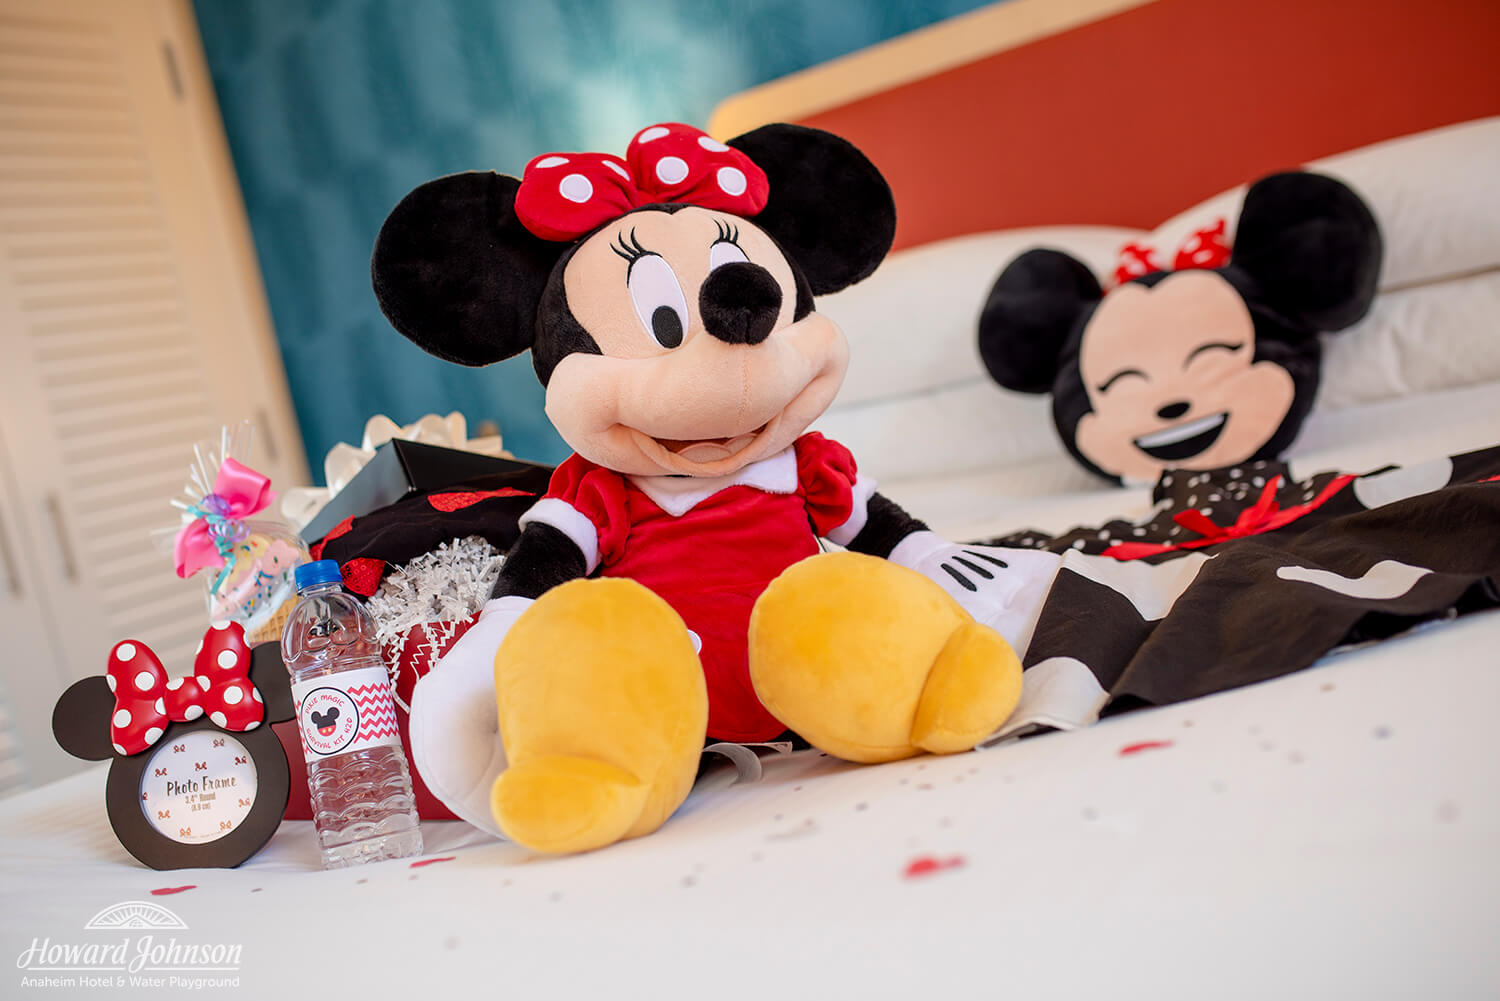 Minnie Mouse themed items sit on a hotel room bed